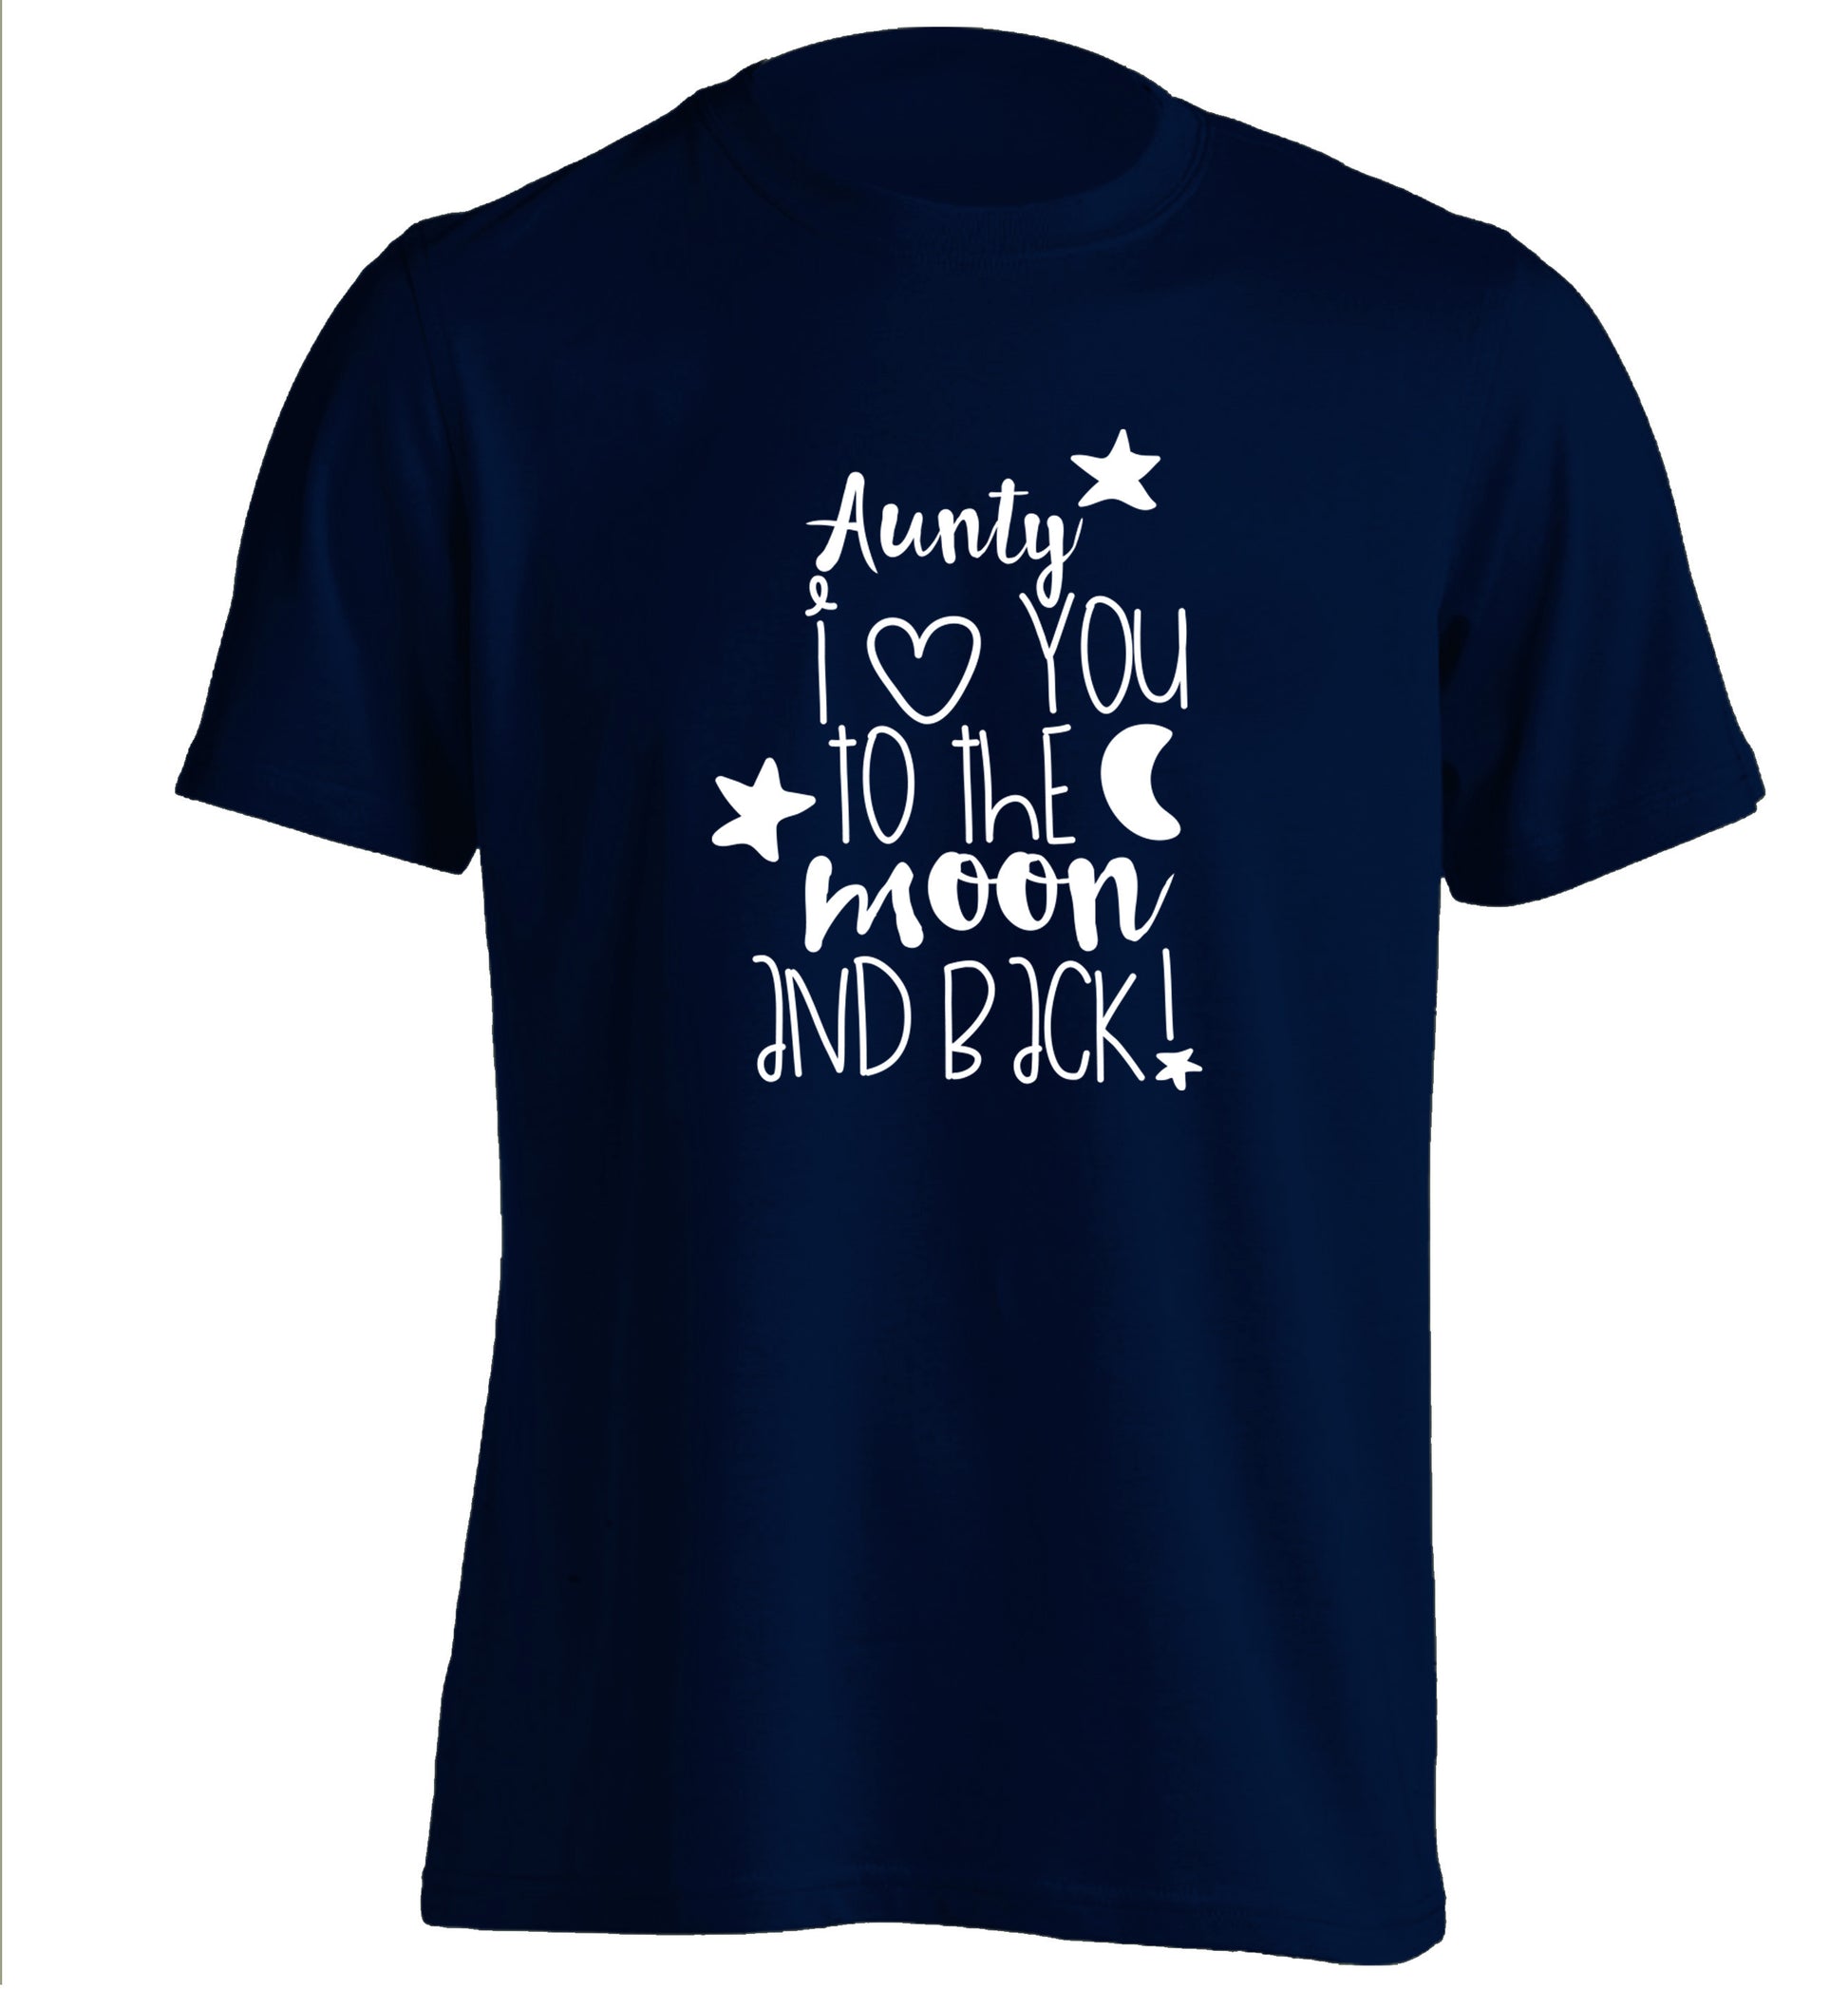 Aunty I love you to the moon and back adults unisex navy Tshirt 2XL